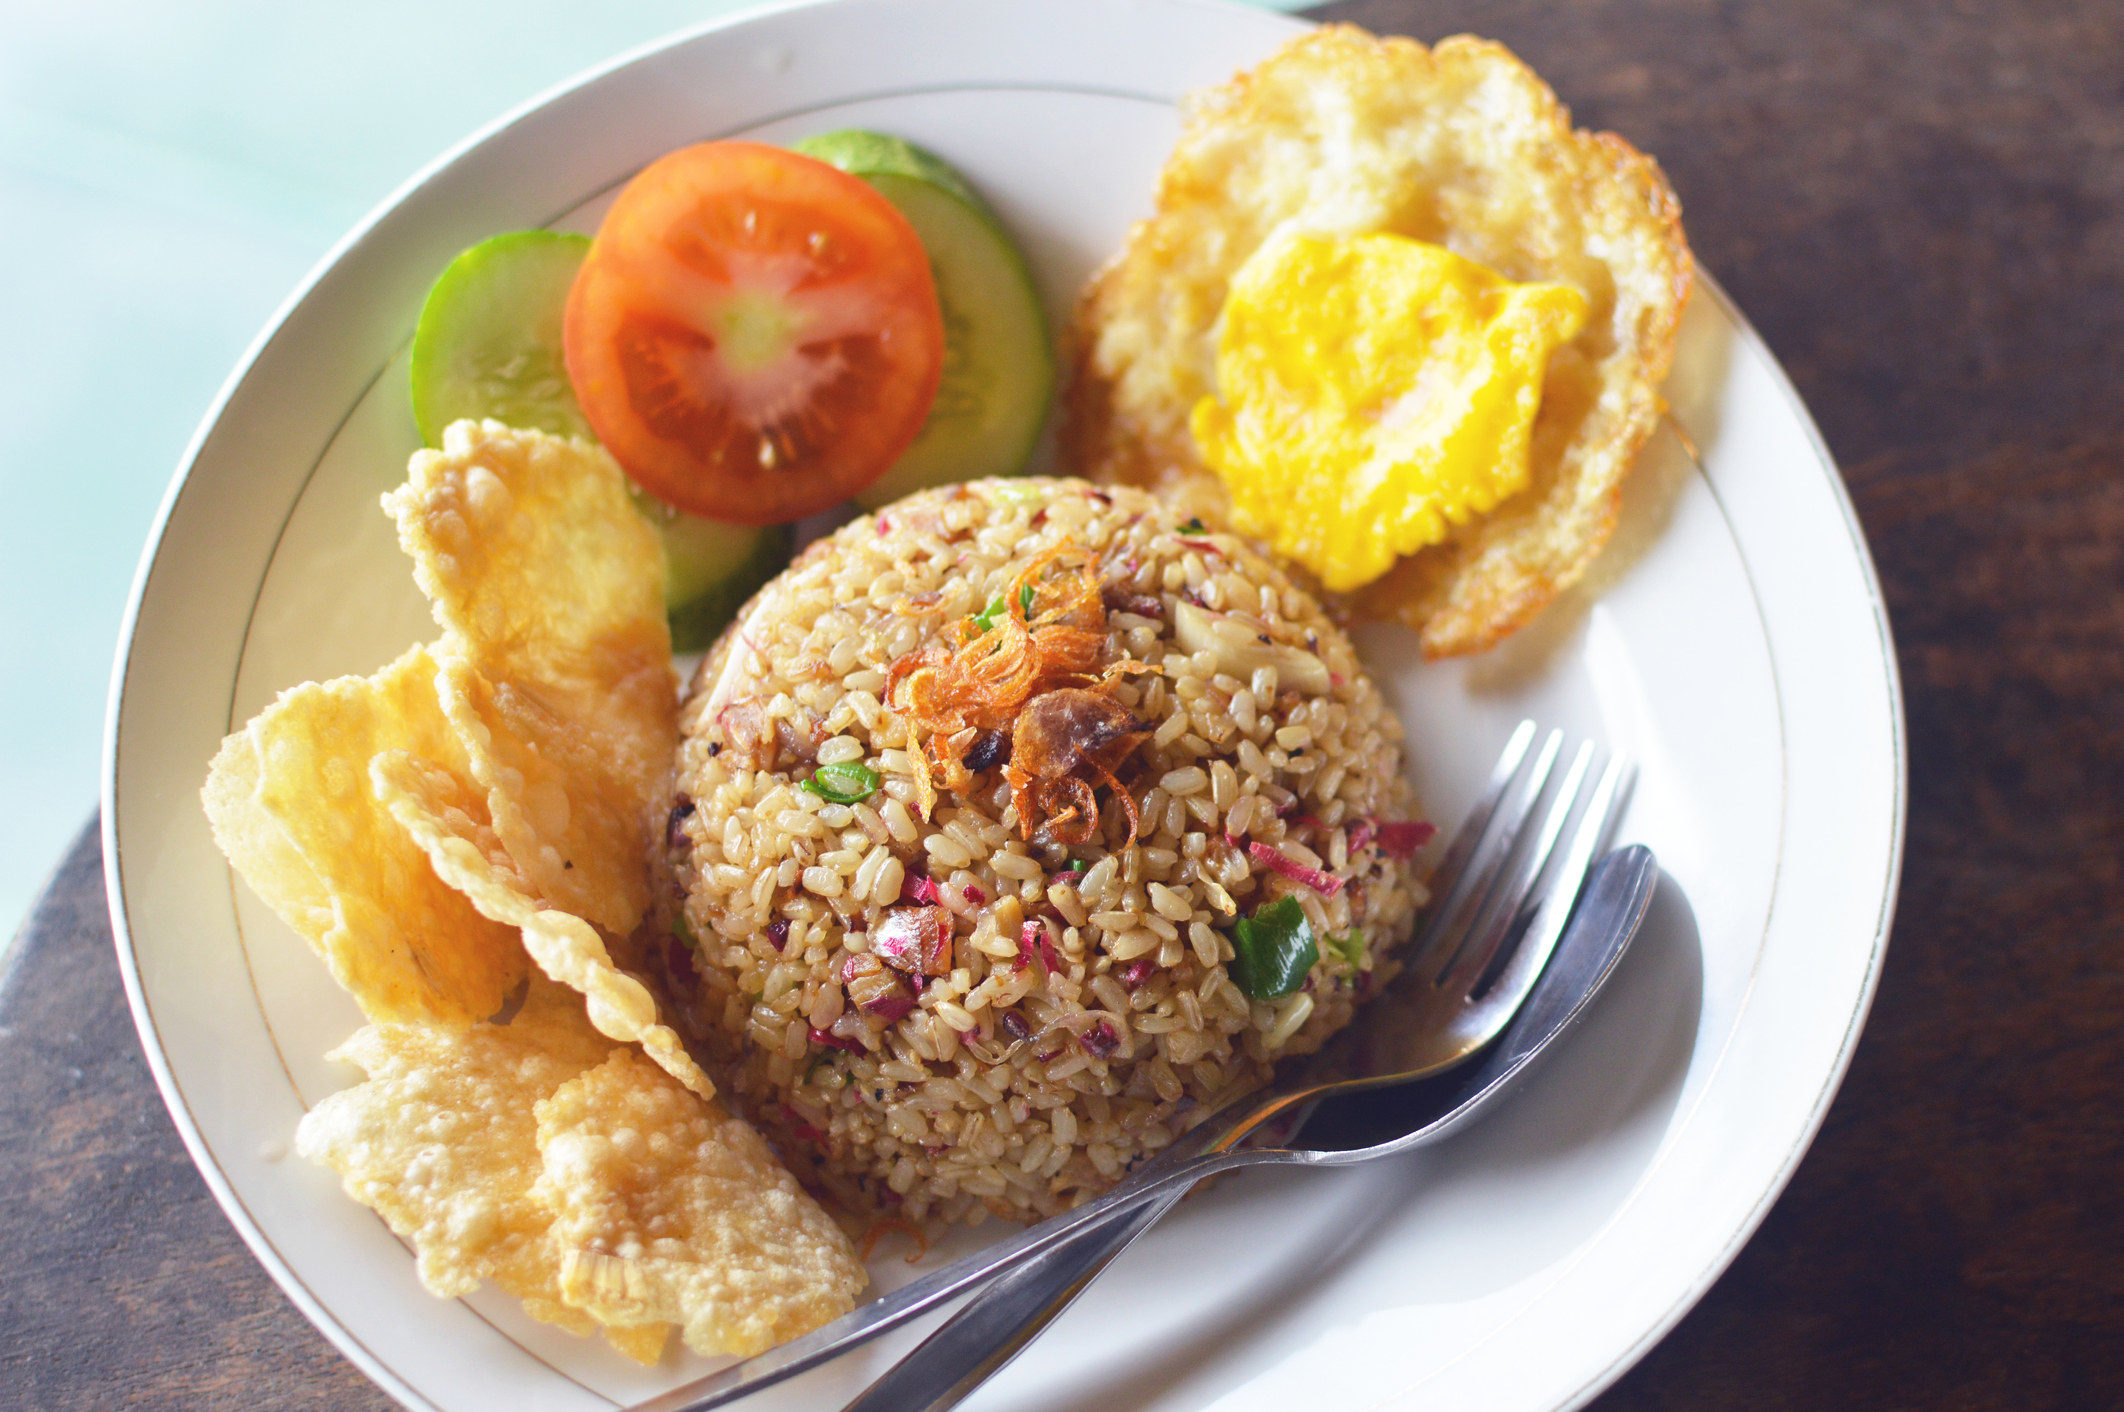 Fried Rice with a side of crackers, tomato, cucumber, and egg.